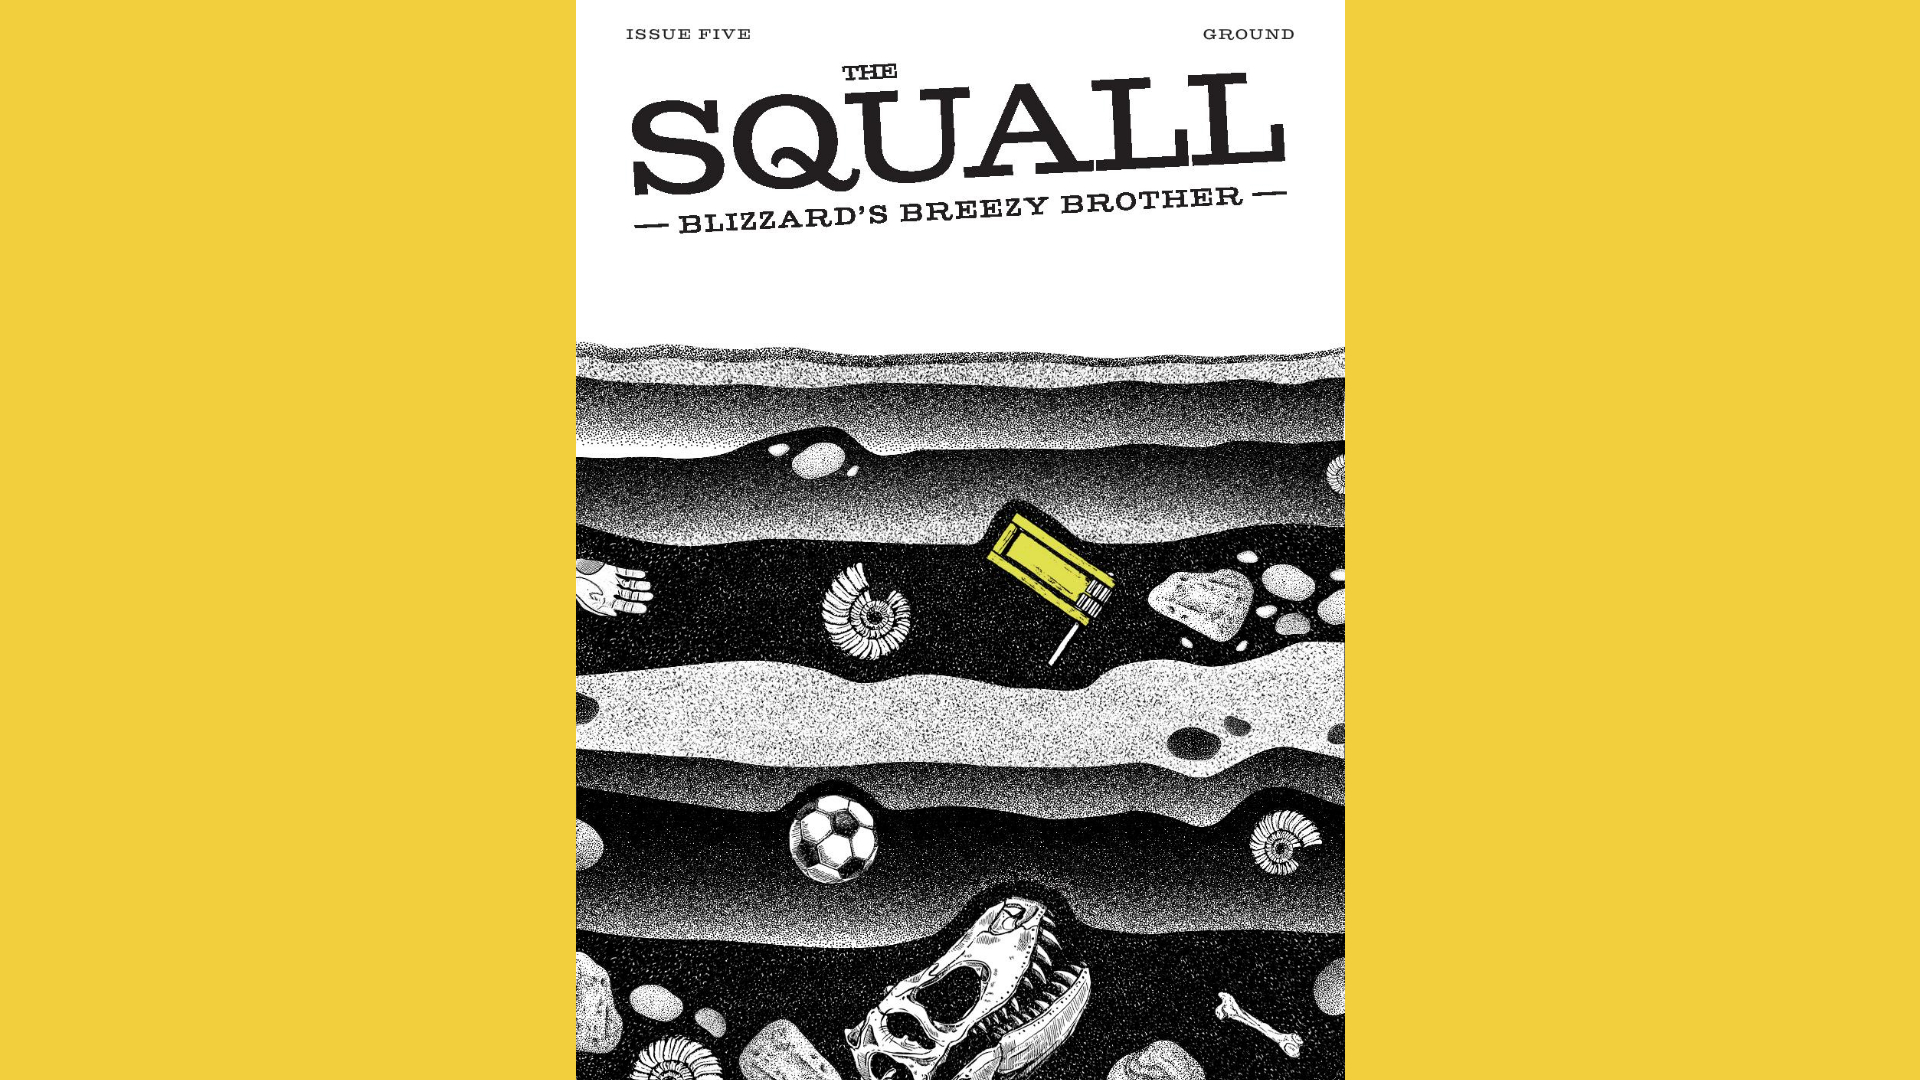 The Squall, Issue Five – Ground